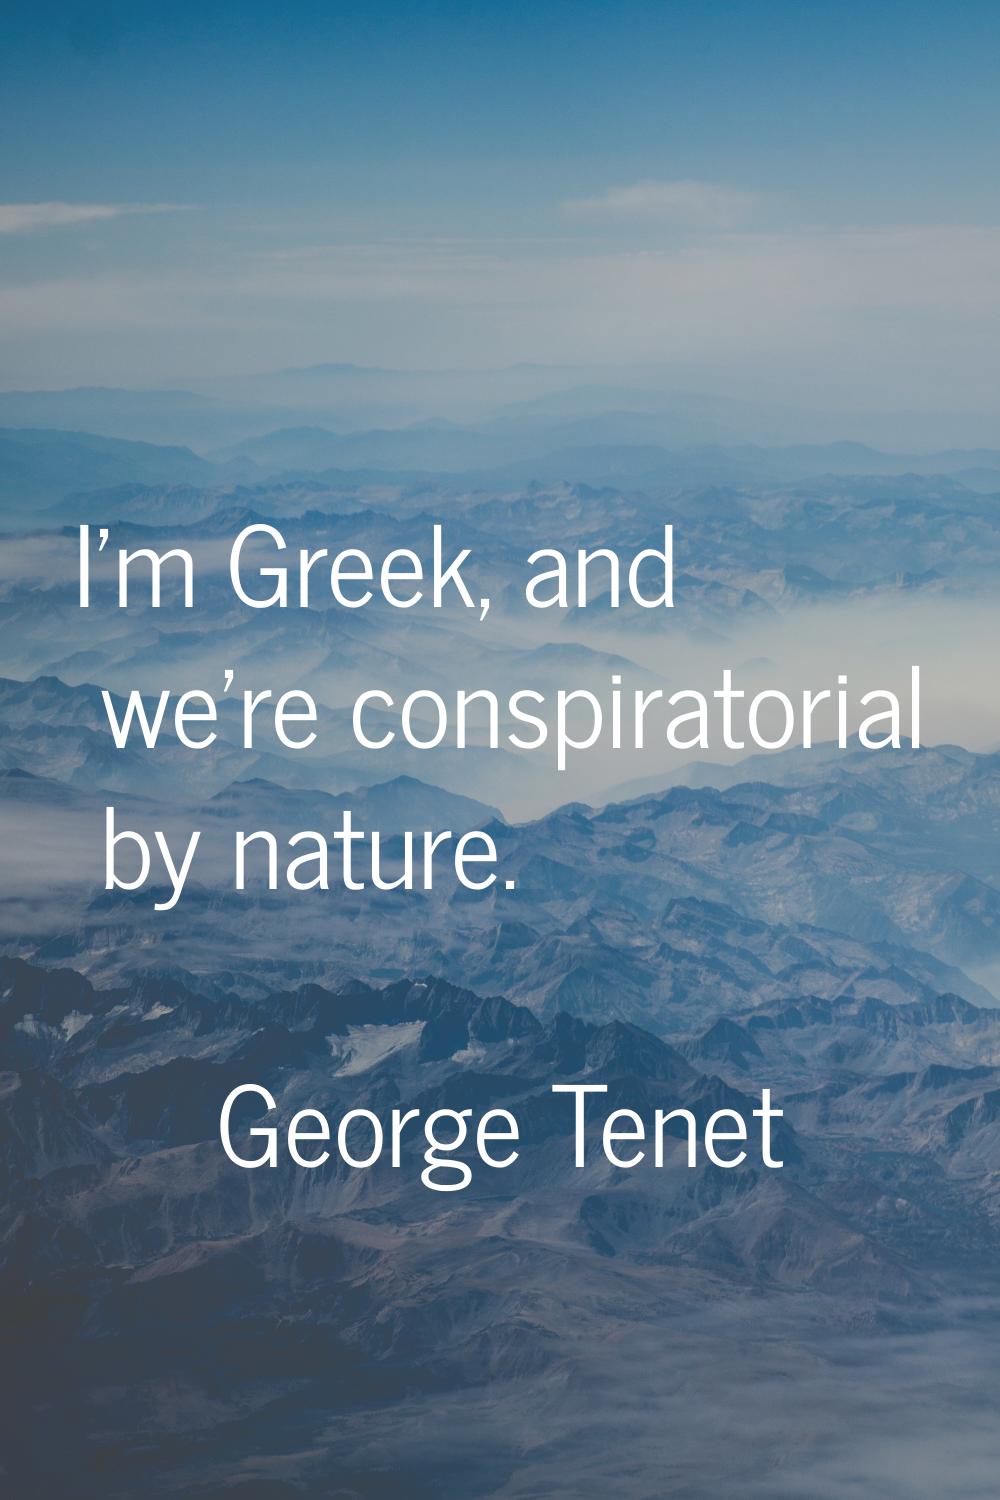 I'm Greek, and we're conspiratorial by nature.